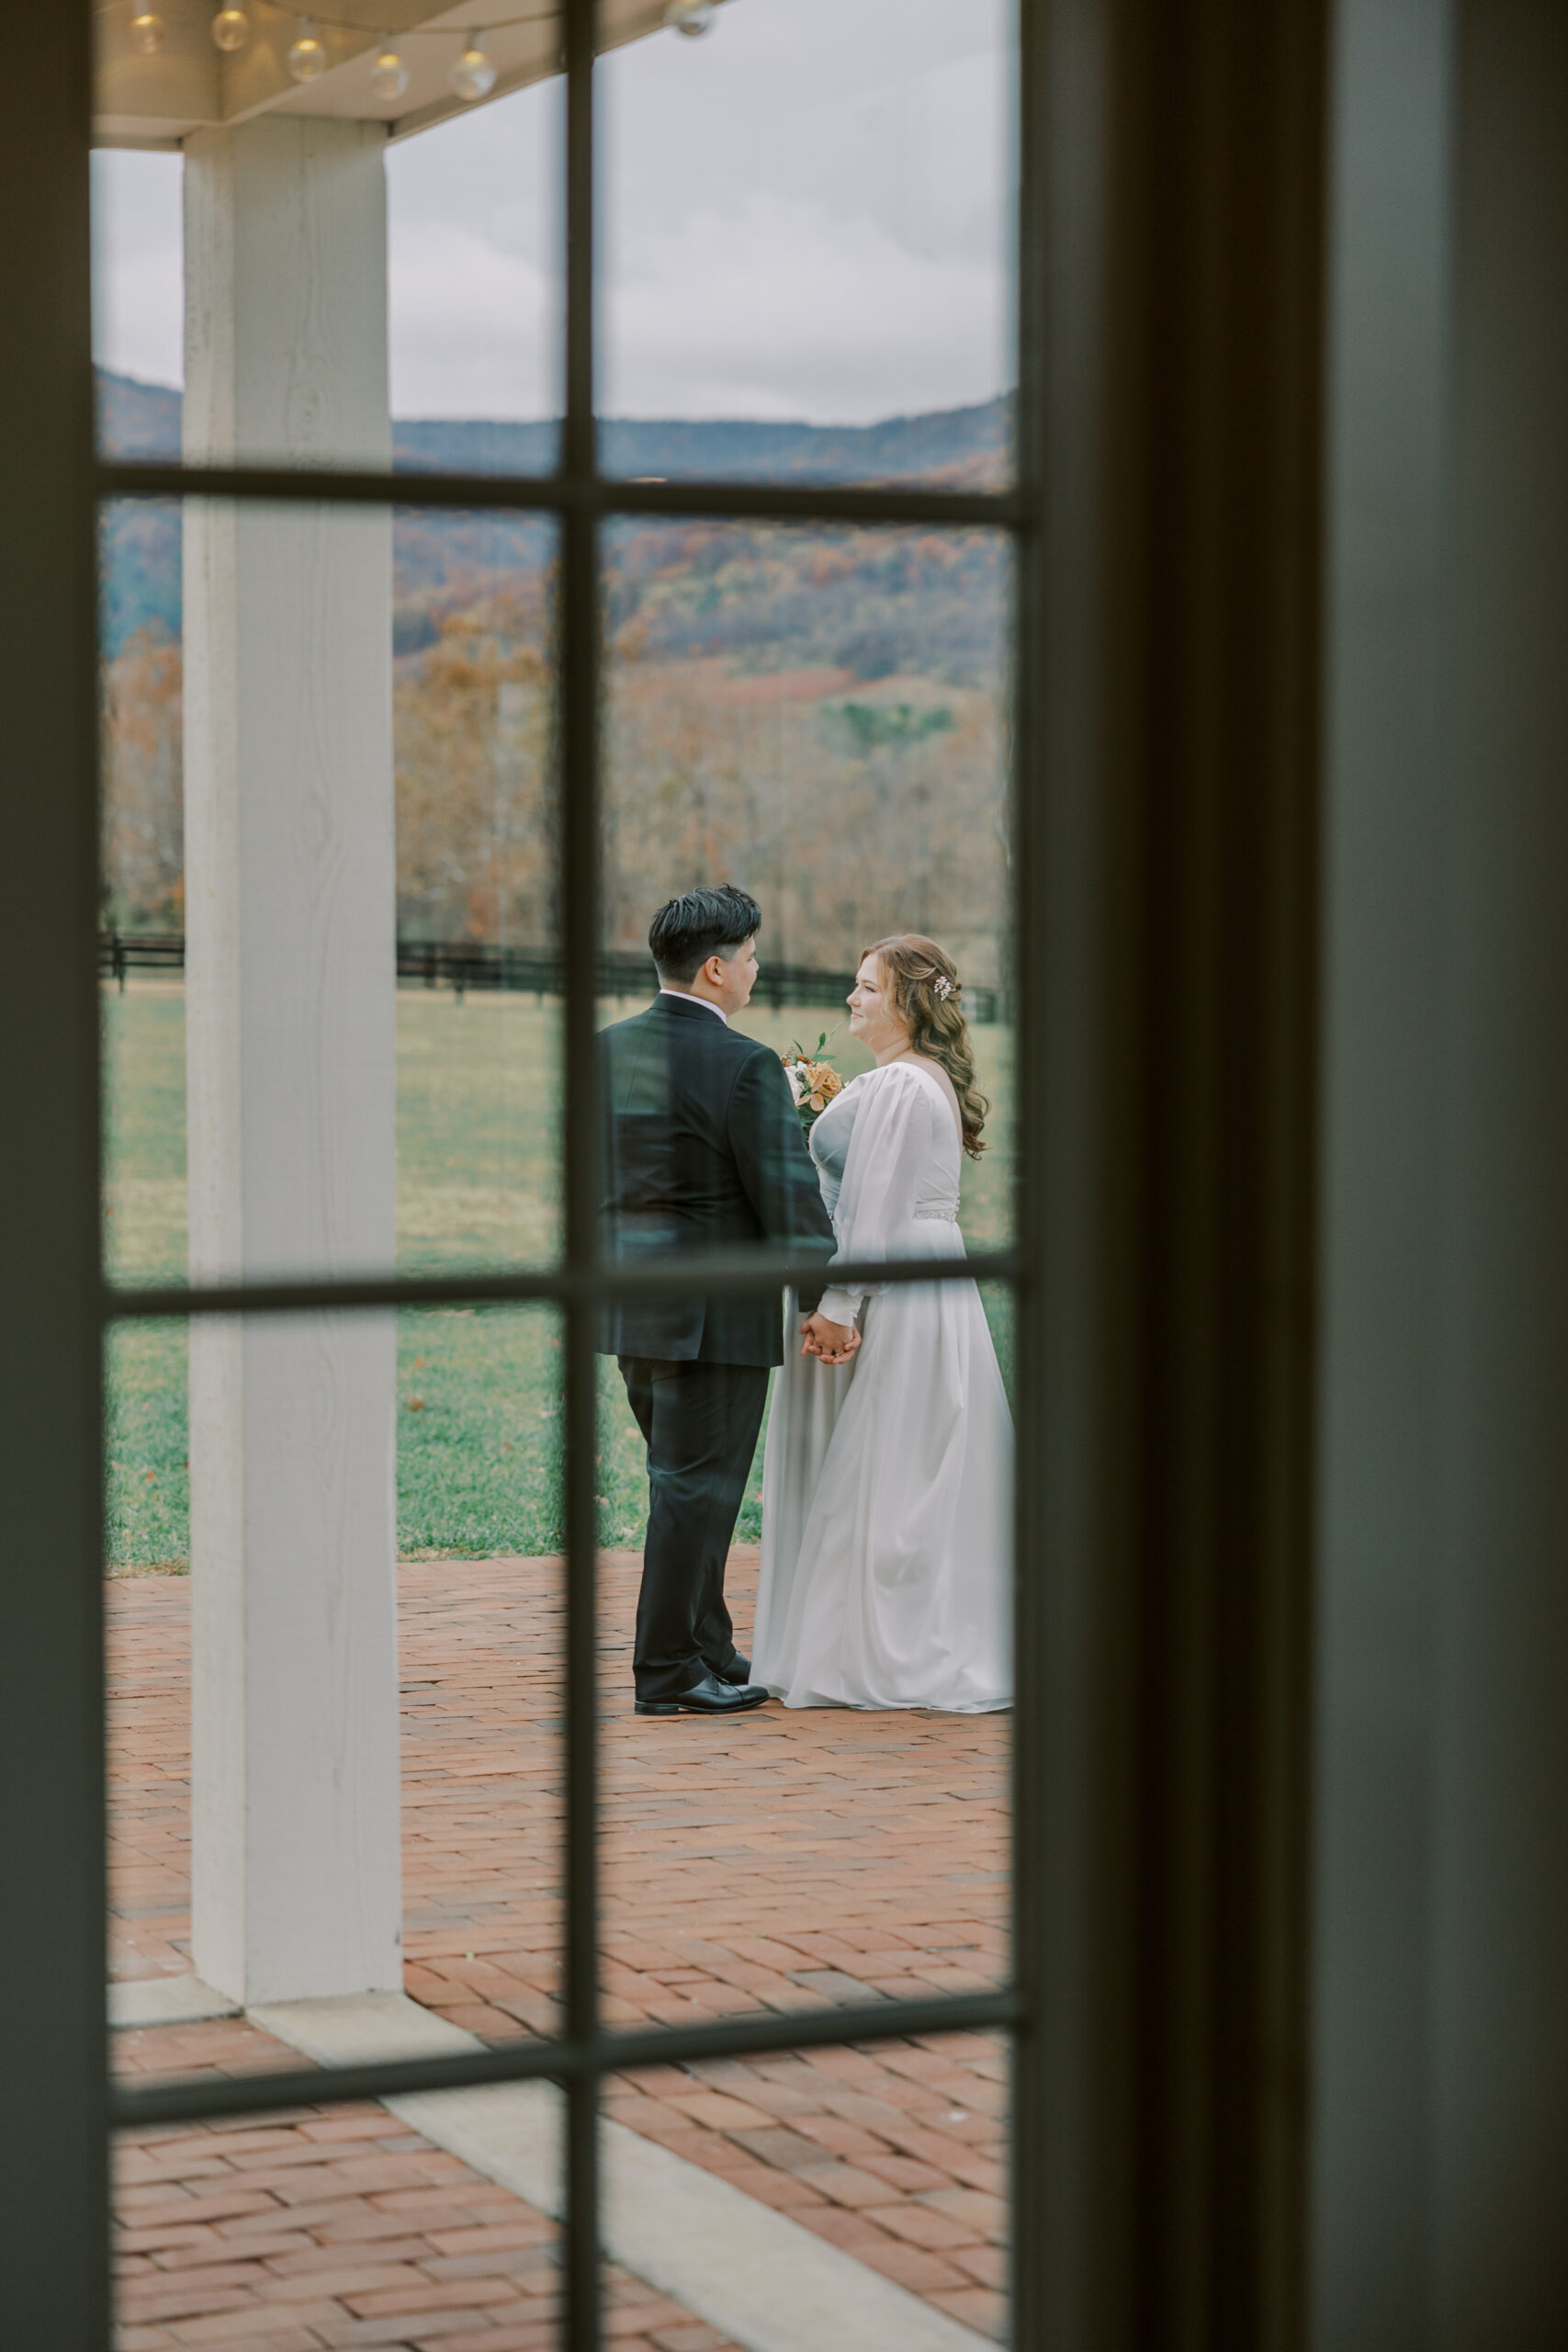 The bride and groom share a private moment behind closed doors during their wedding at King Family Vineyards.